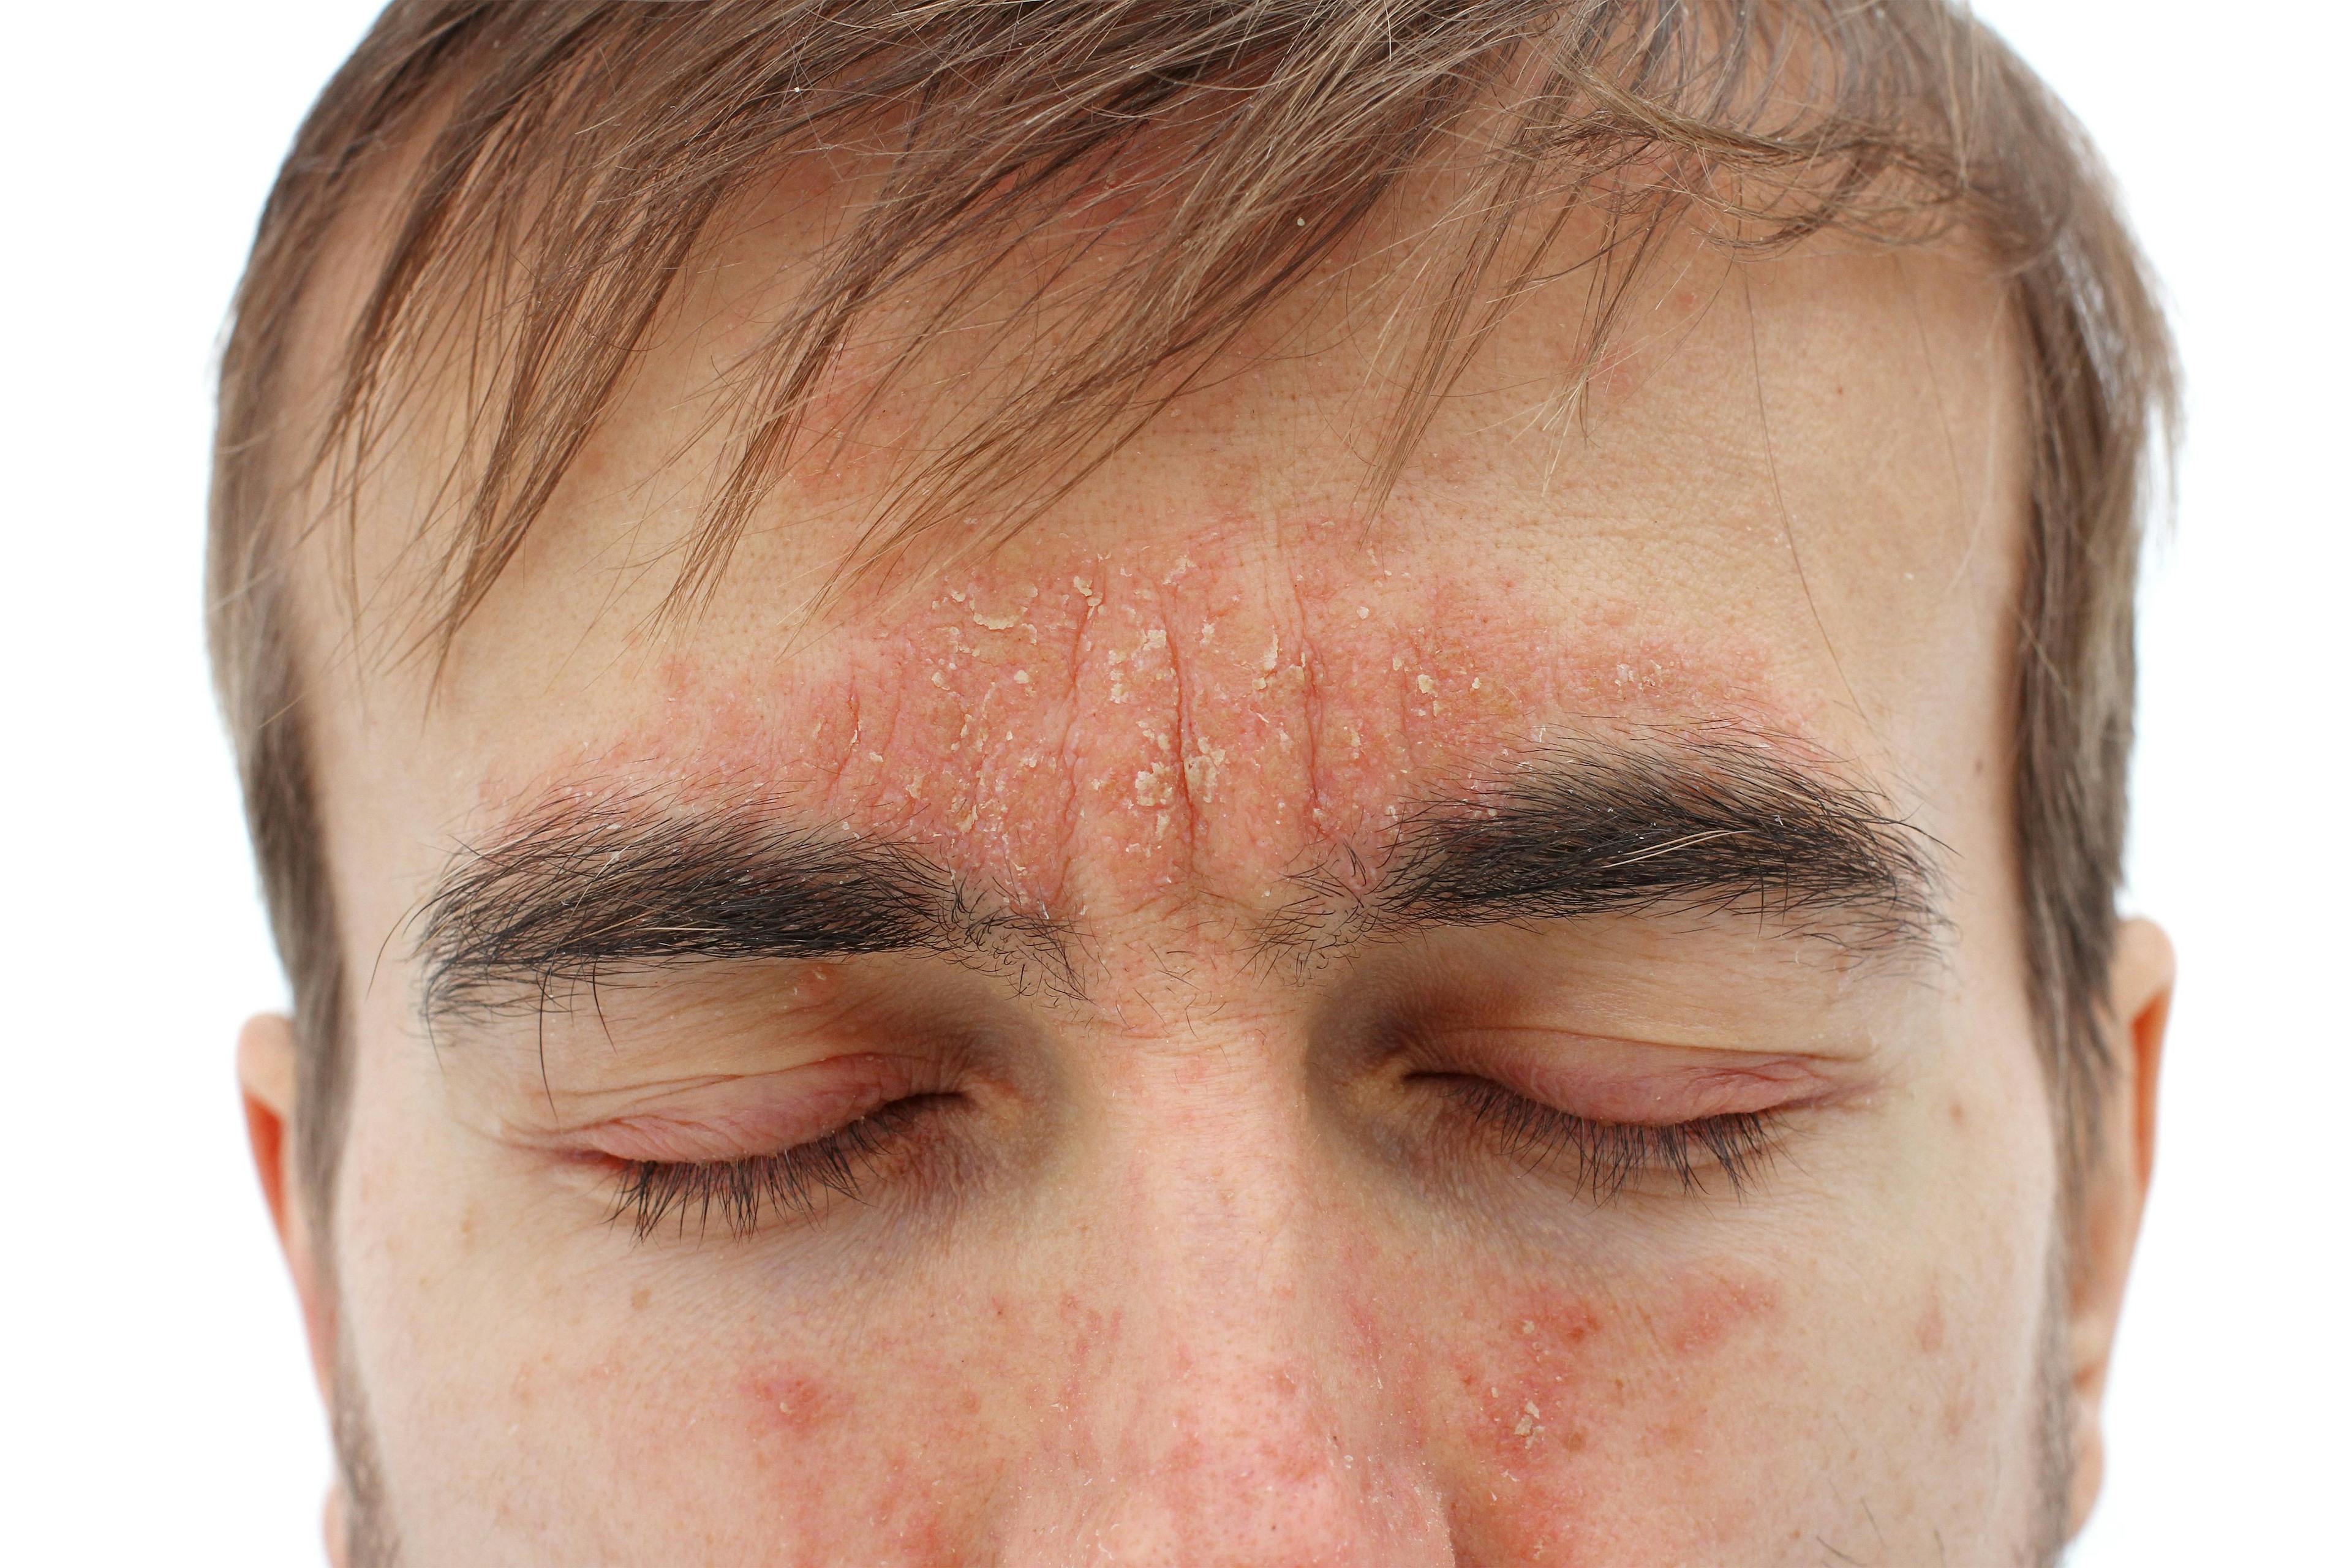 Close up view of man with eyes closed and atopic dermatitis around the forehead and nose